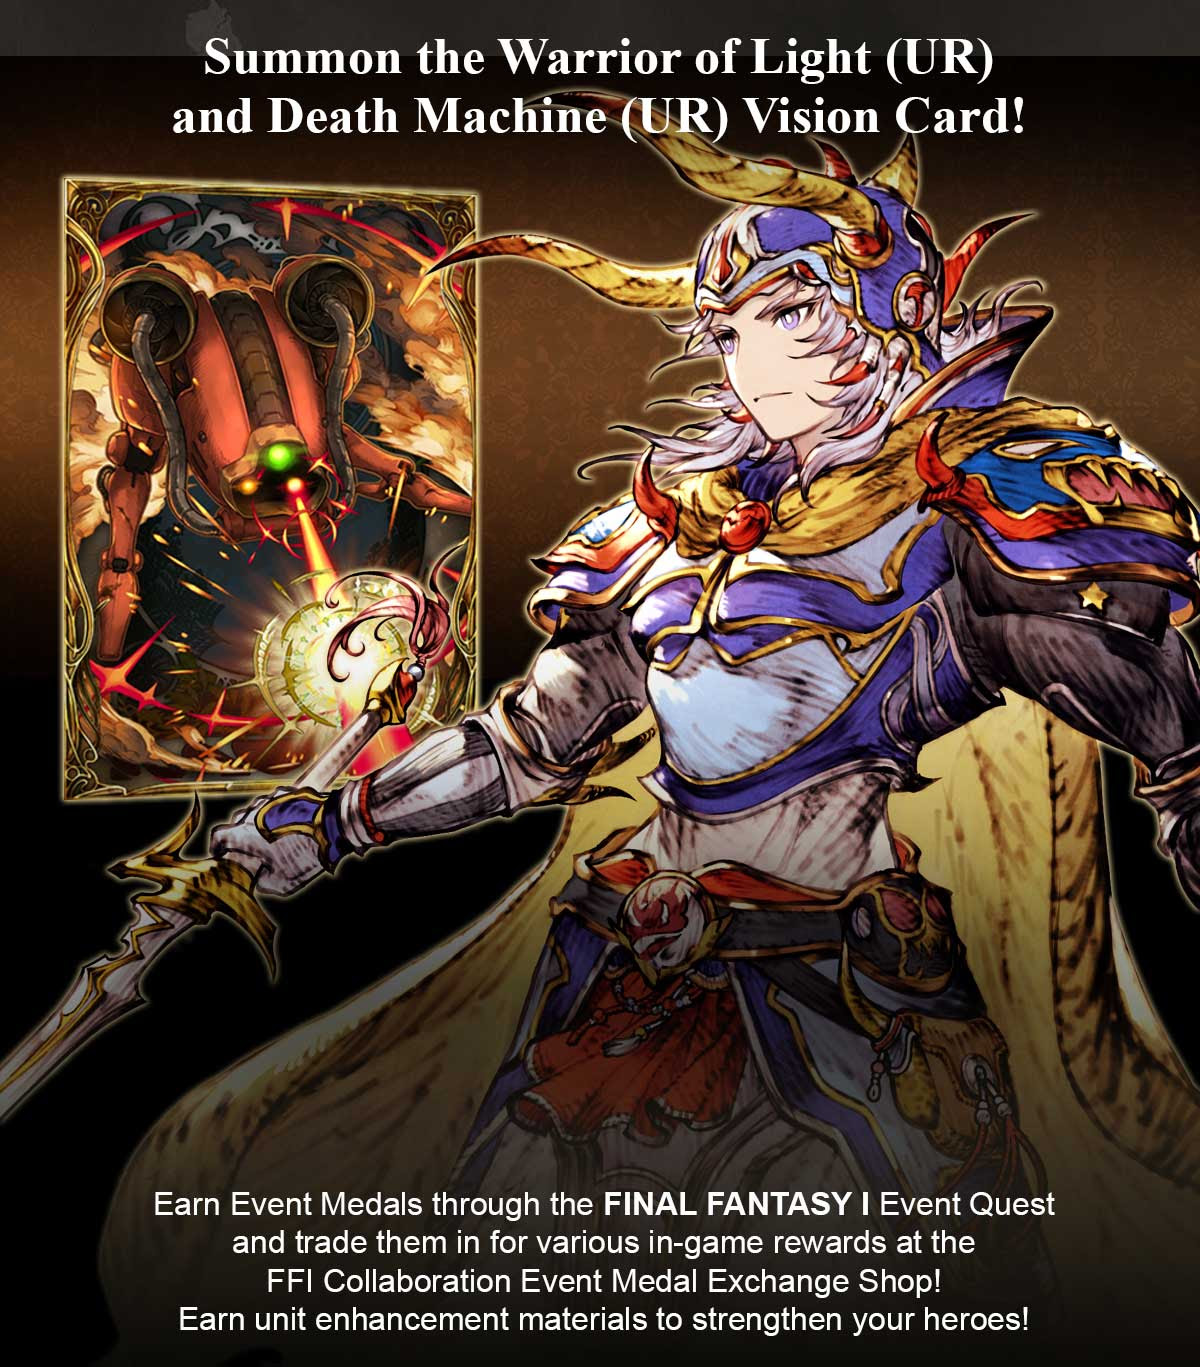 Summon the Warrior of Light (UR) and Death Machine (UR) Vision Card!